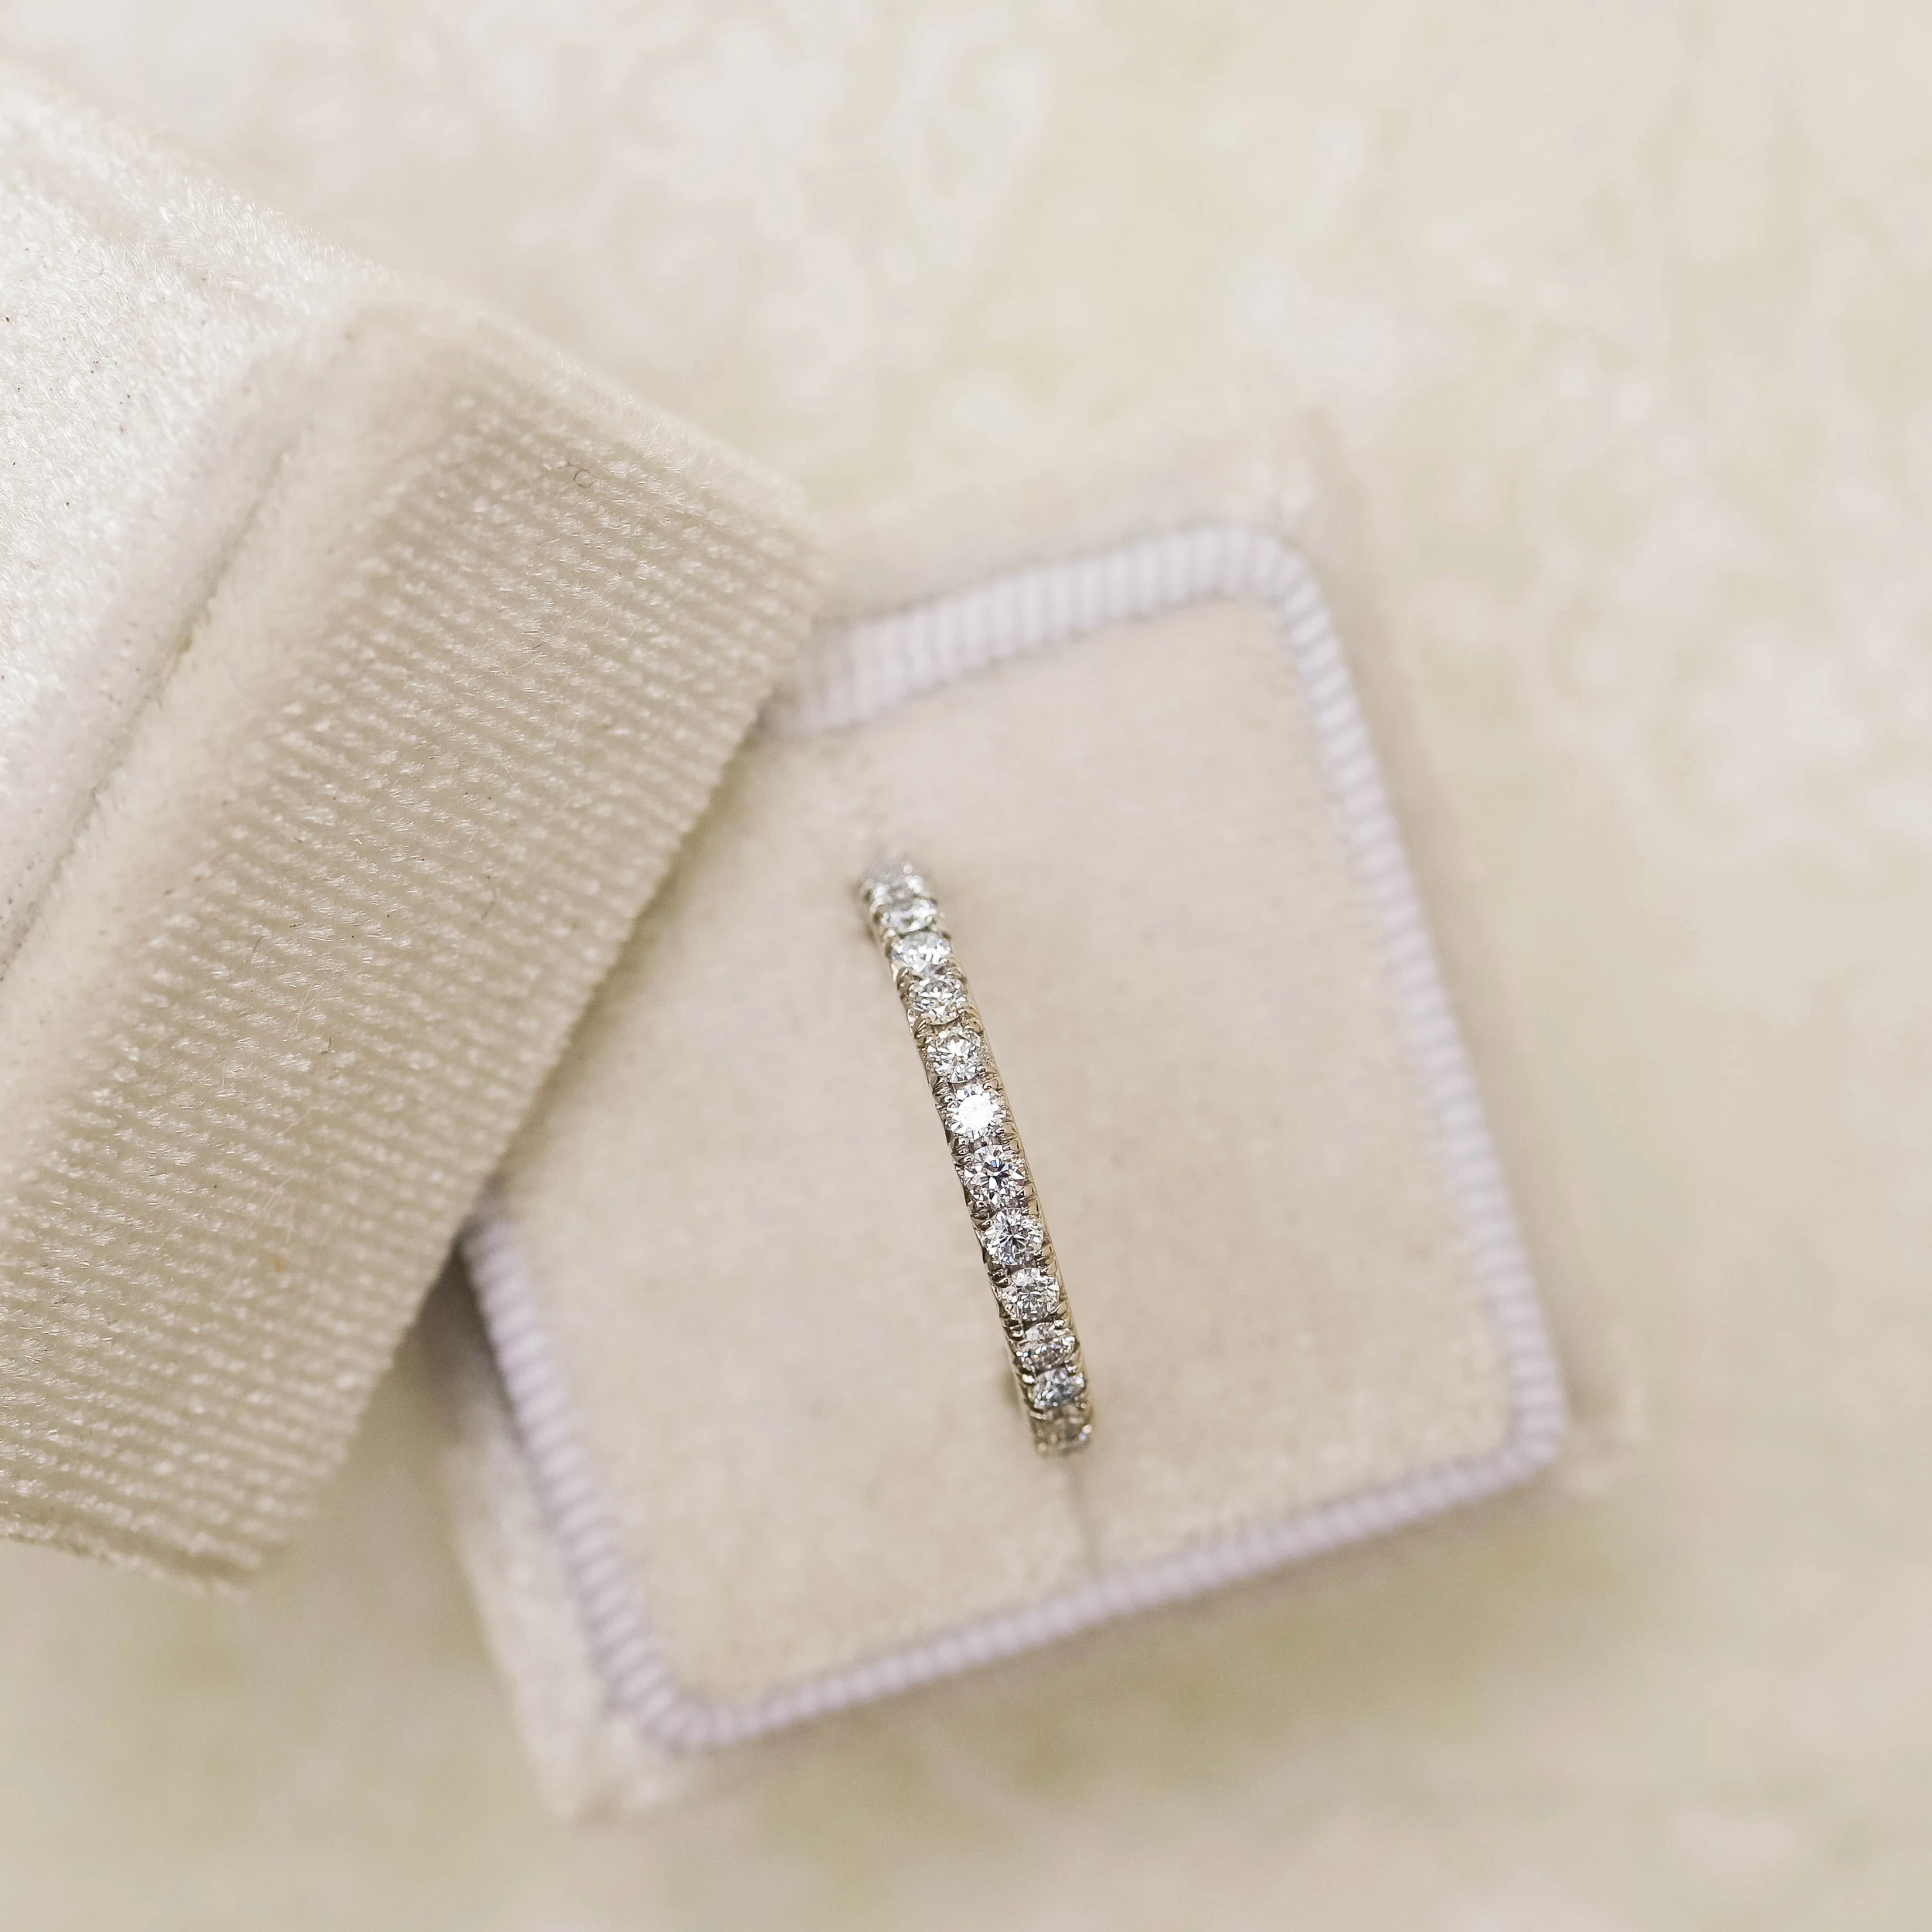 Exceptional Quality 0.4 Carat Round Diamonds set in Platinum French Pavé Half Band (Side View)